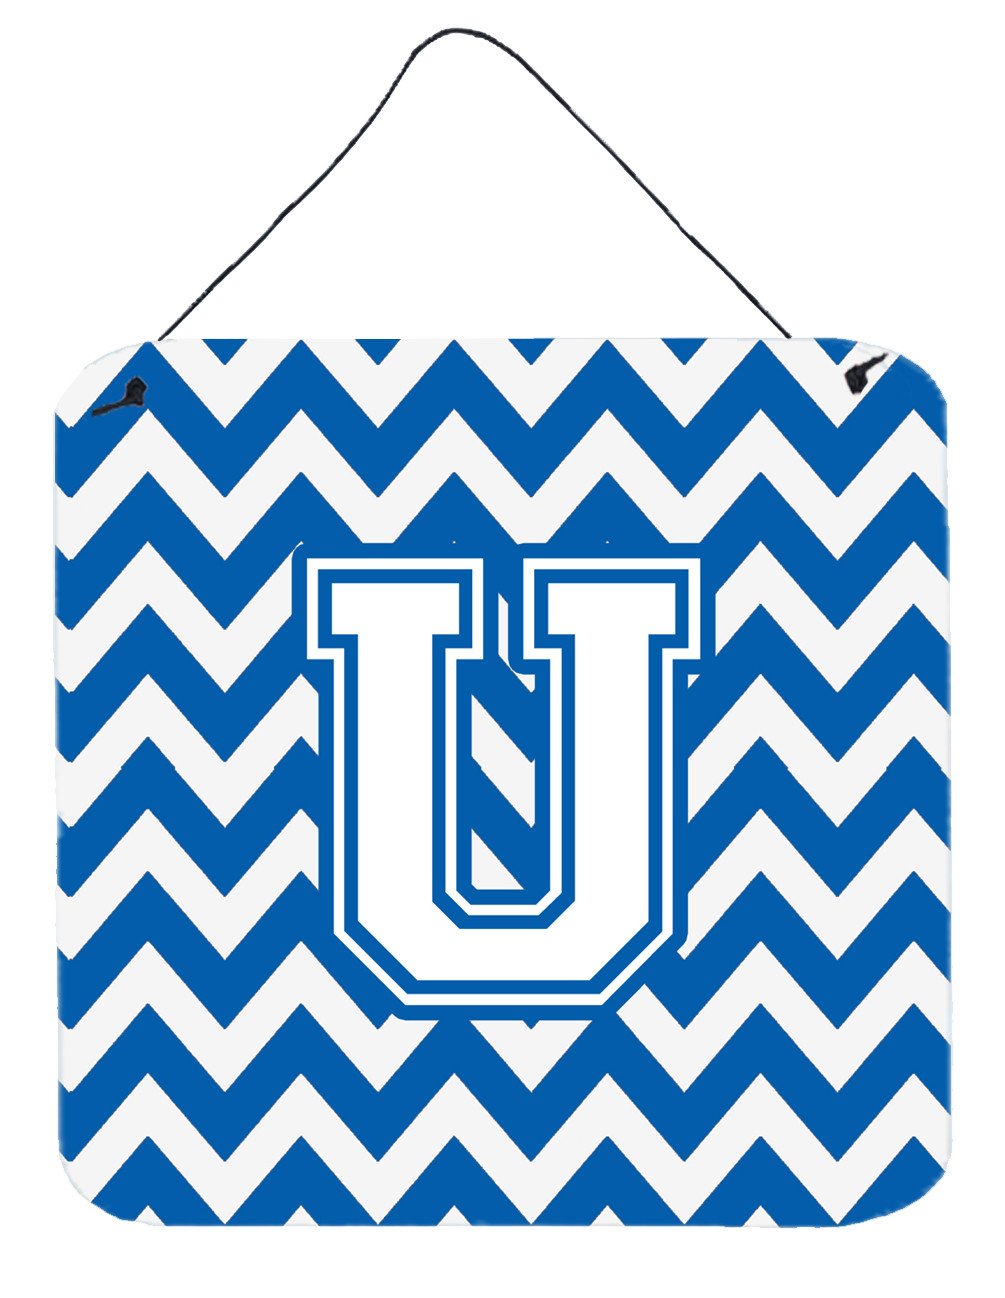 Letter U Chevron Blue and White Wall or Door Hanging Prints CJ1045-UDS66 by Caroline's Treasures